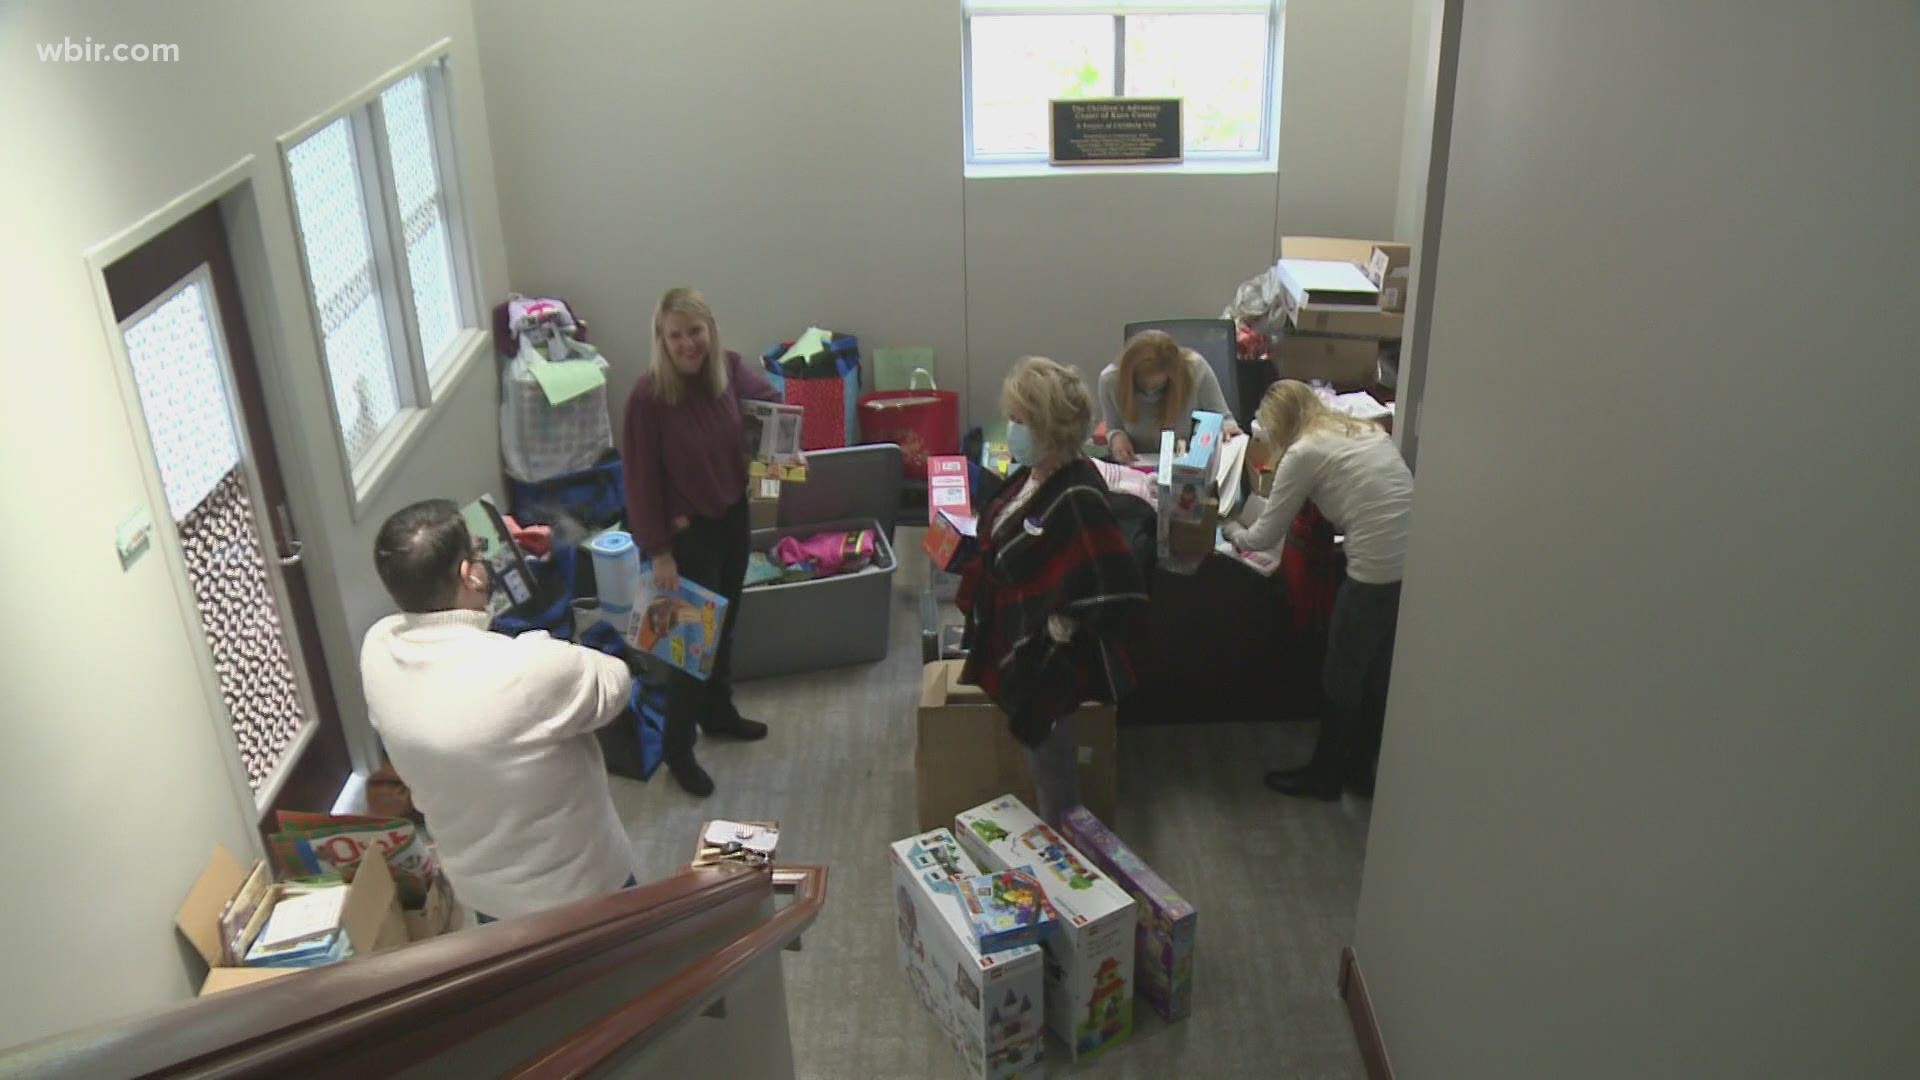 Volunteers hope the gifts will help spread holiday cheer to the children who need it most.